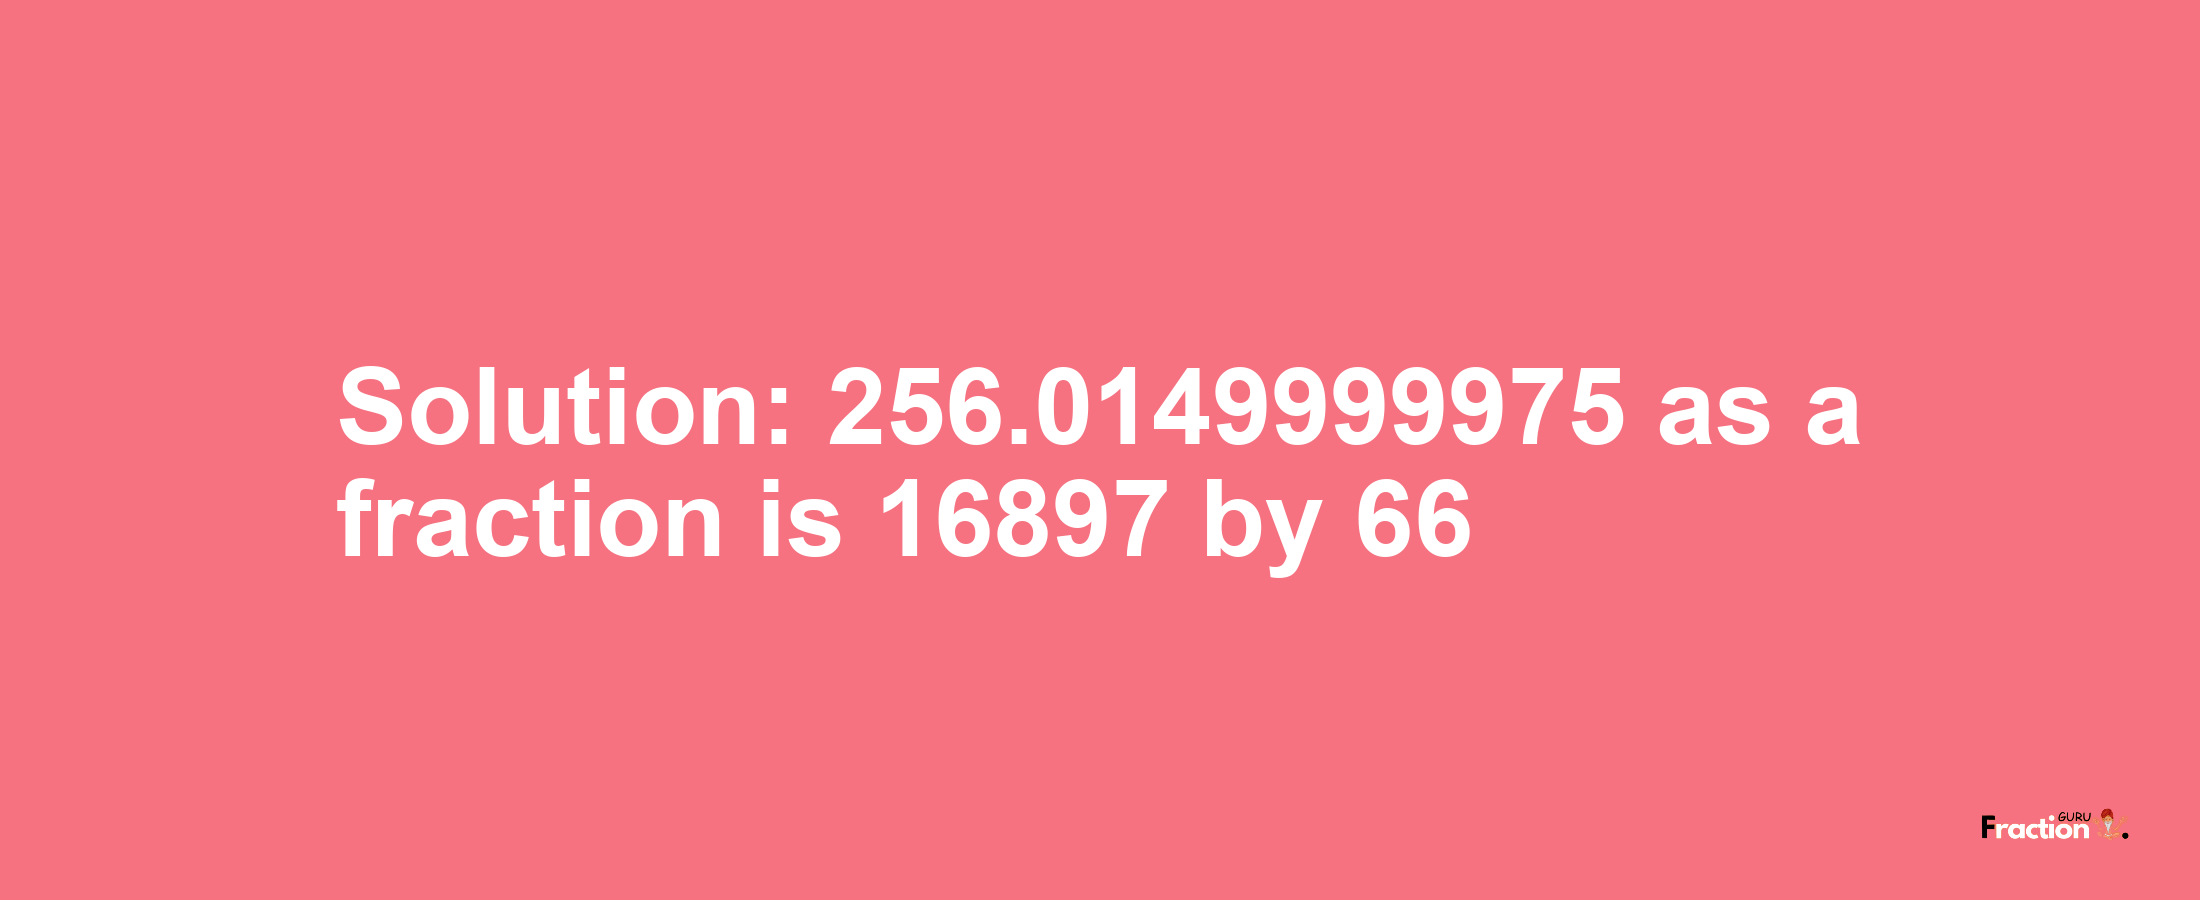 Solution:256.0149999975 as a fraction is 16897/66